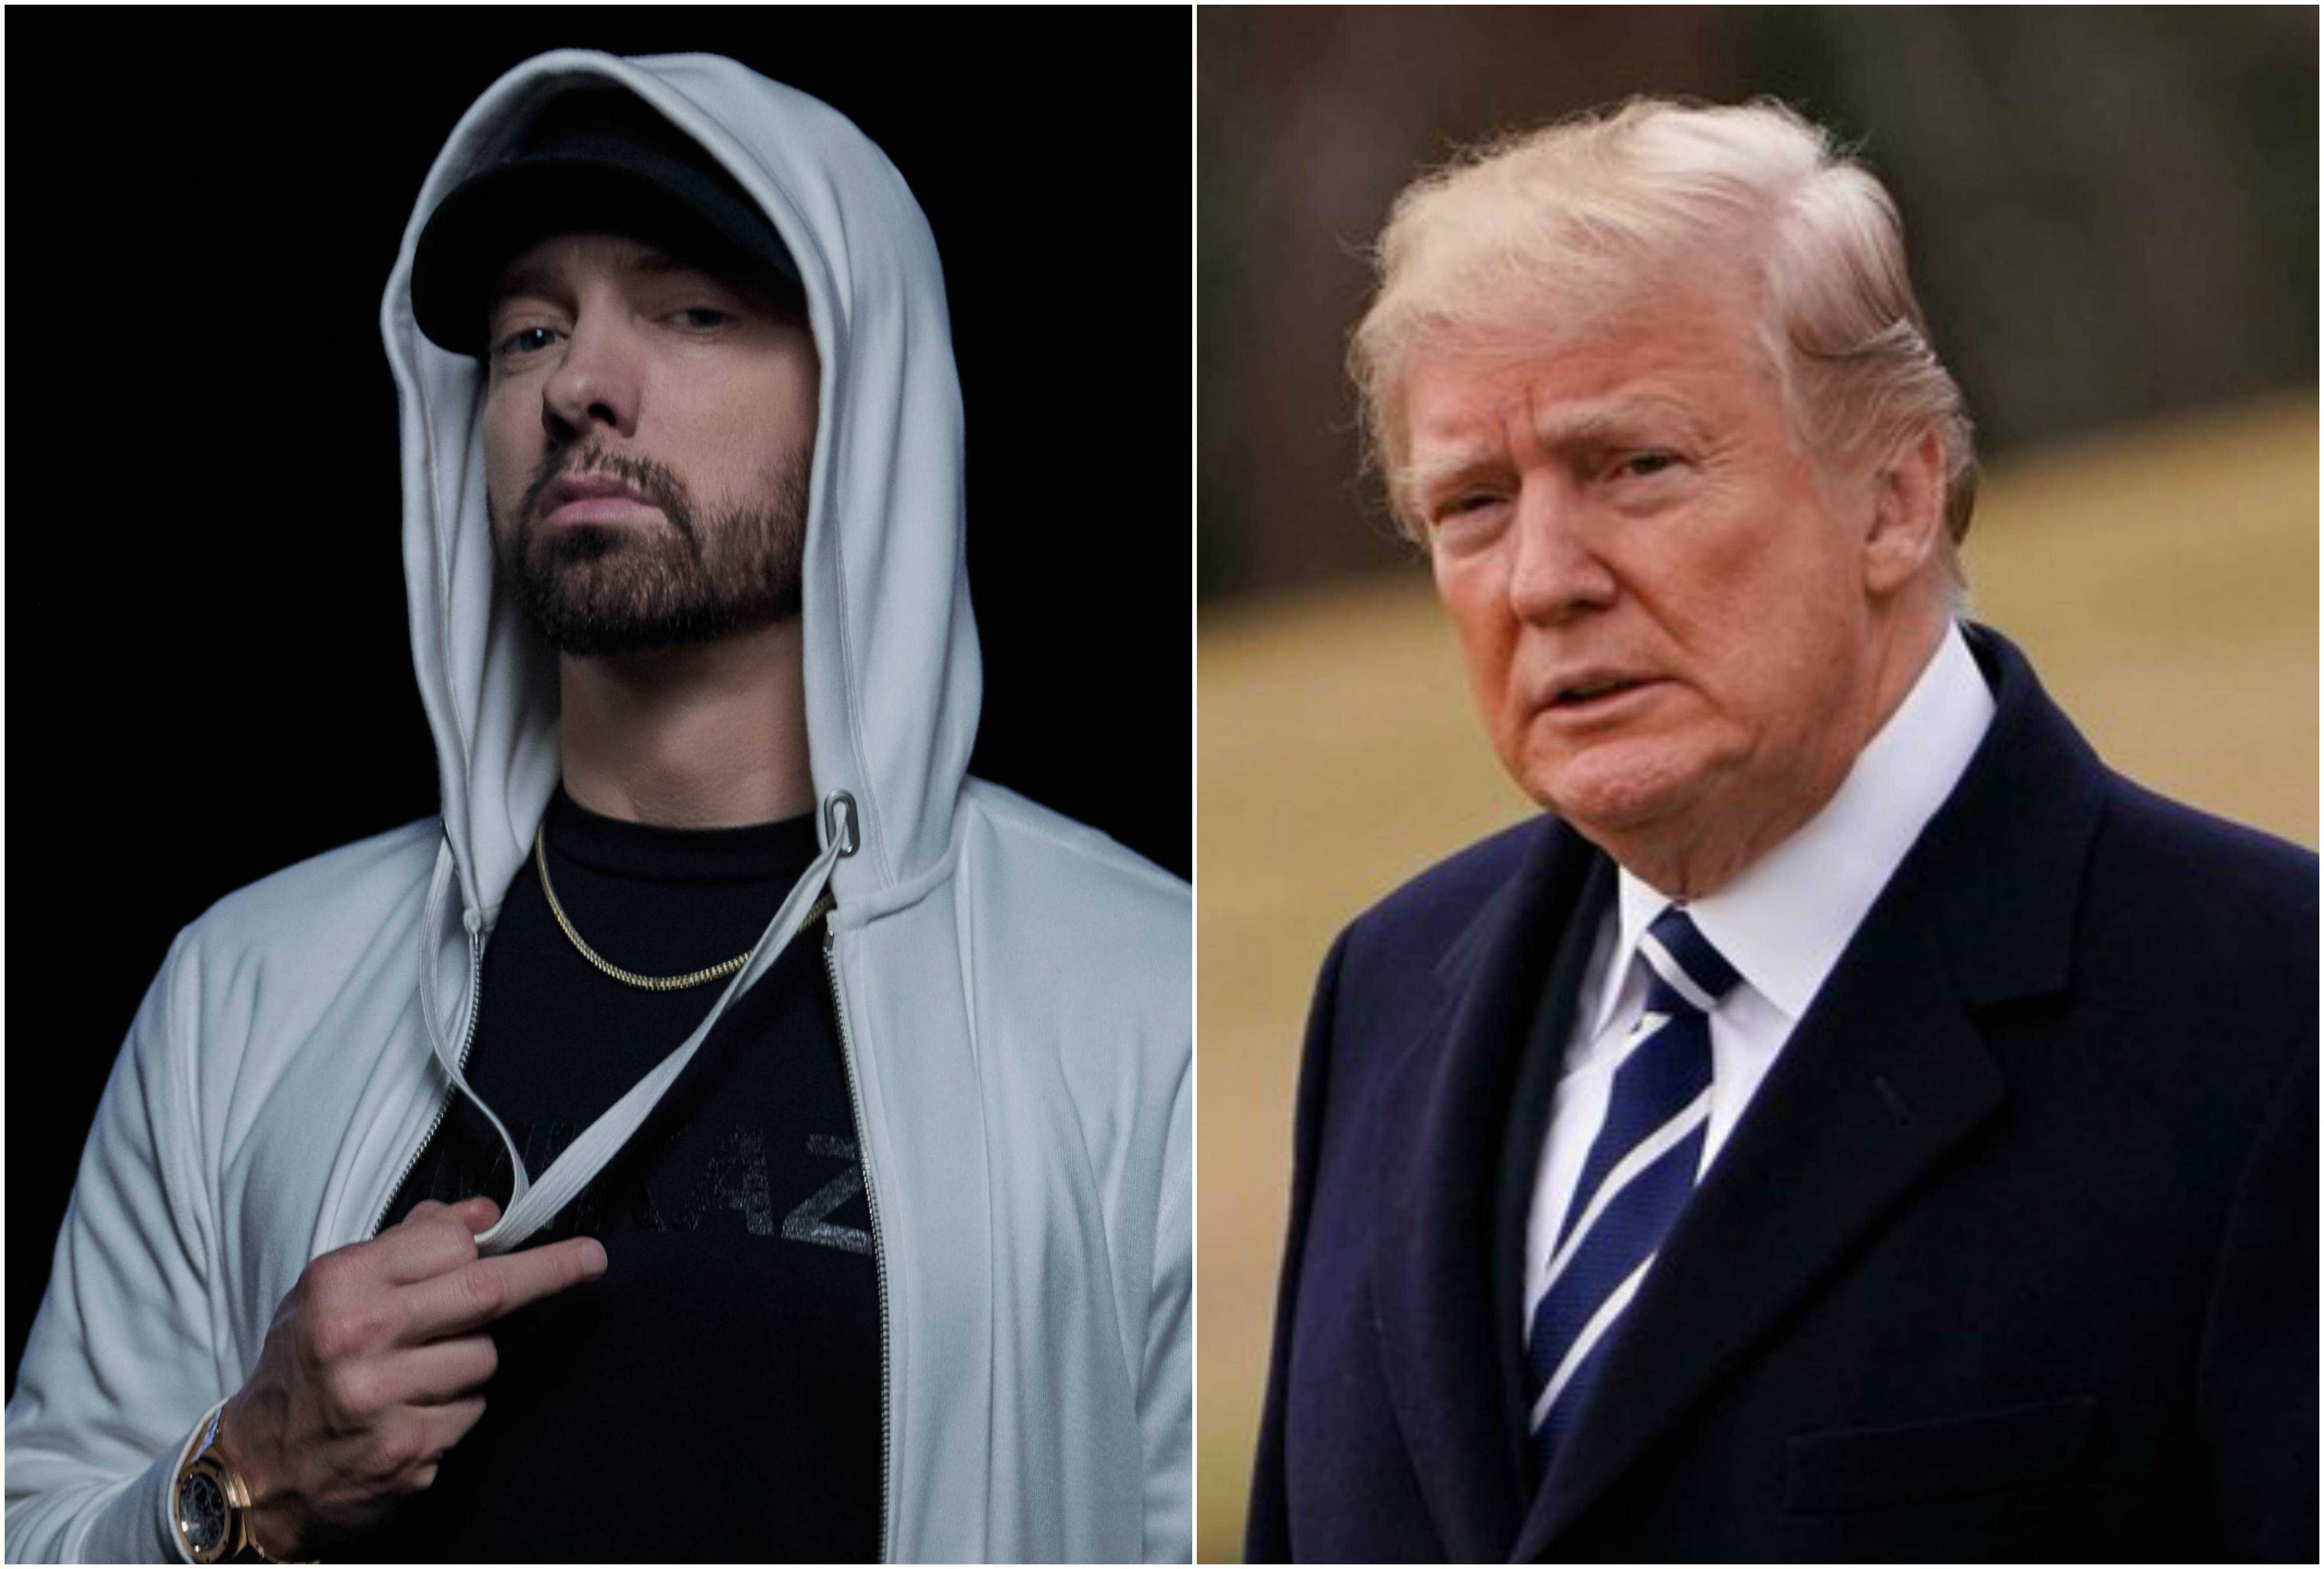 Eminem Reveals Being Questioned by Secret Service About Possible Threats To President Trump